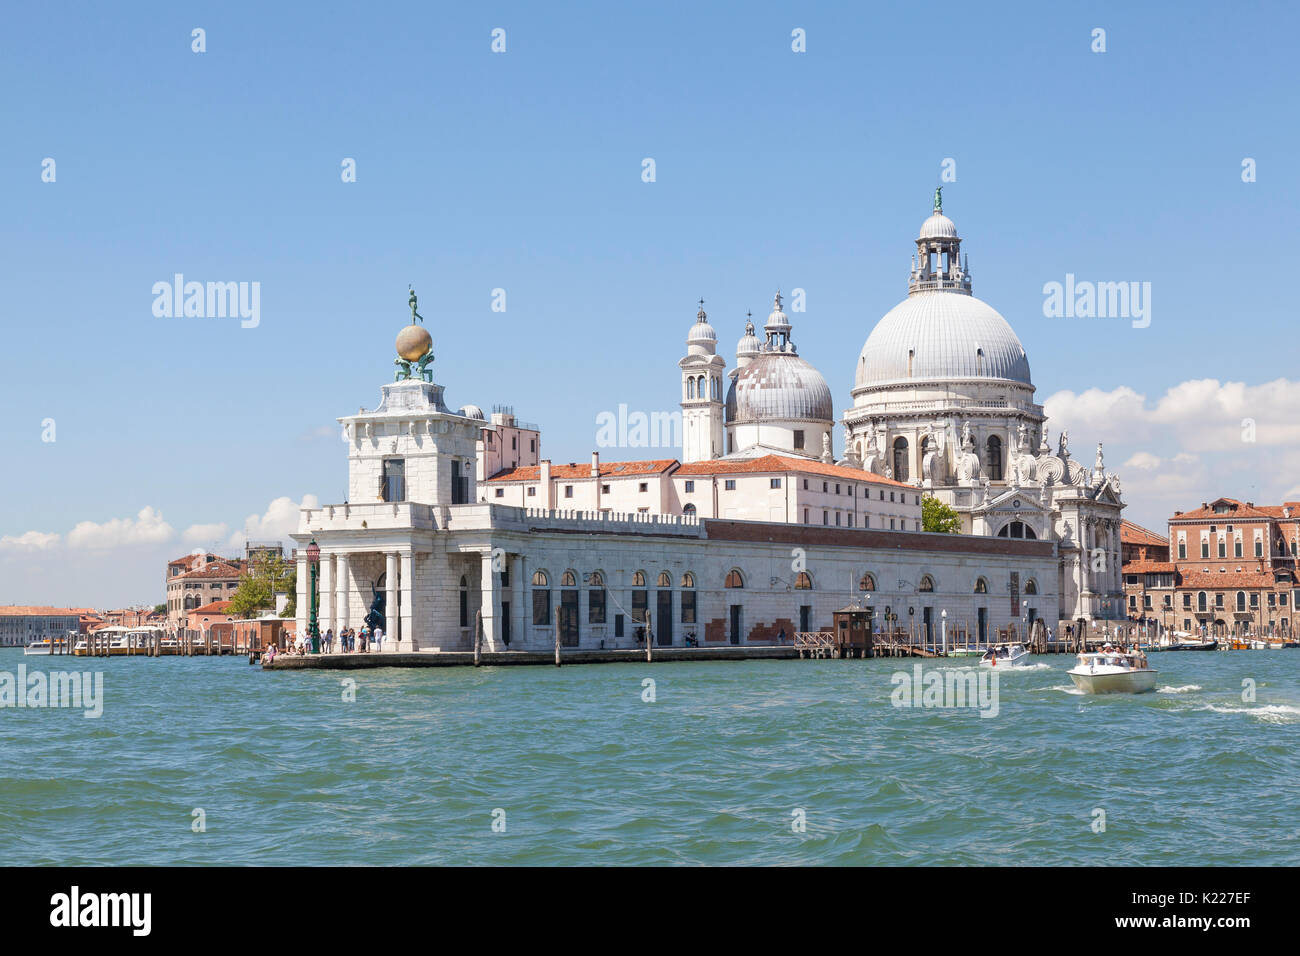 View from the lagoon of Punta della Dogana and Basilica Santa Maria della Salute, Venice, Italy on a sunny day with tourists and water taxis. This use Stock Photo